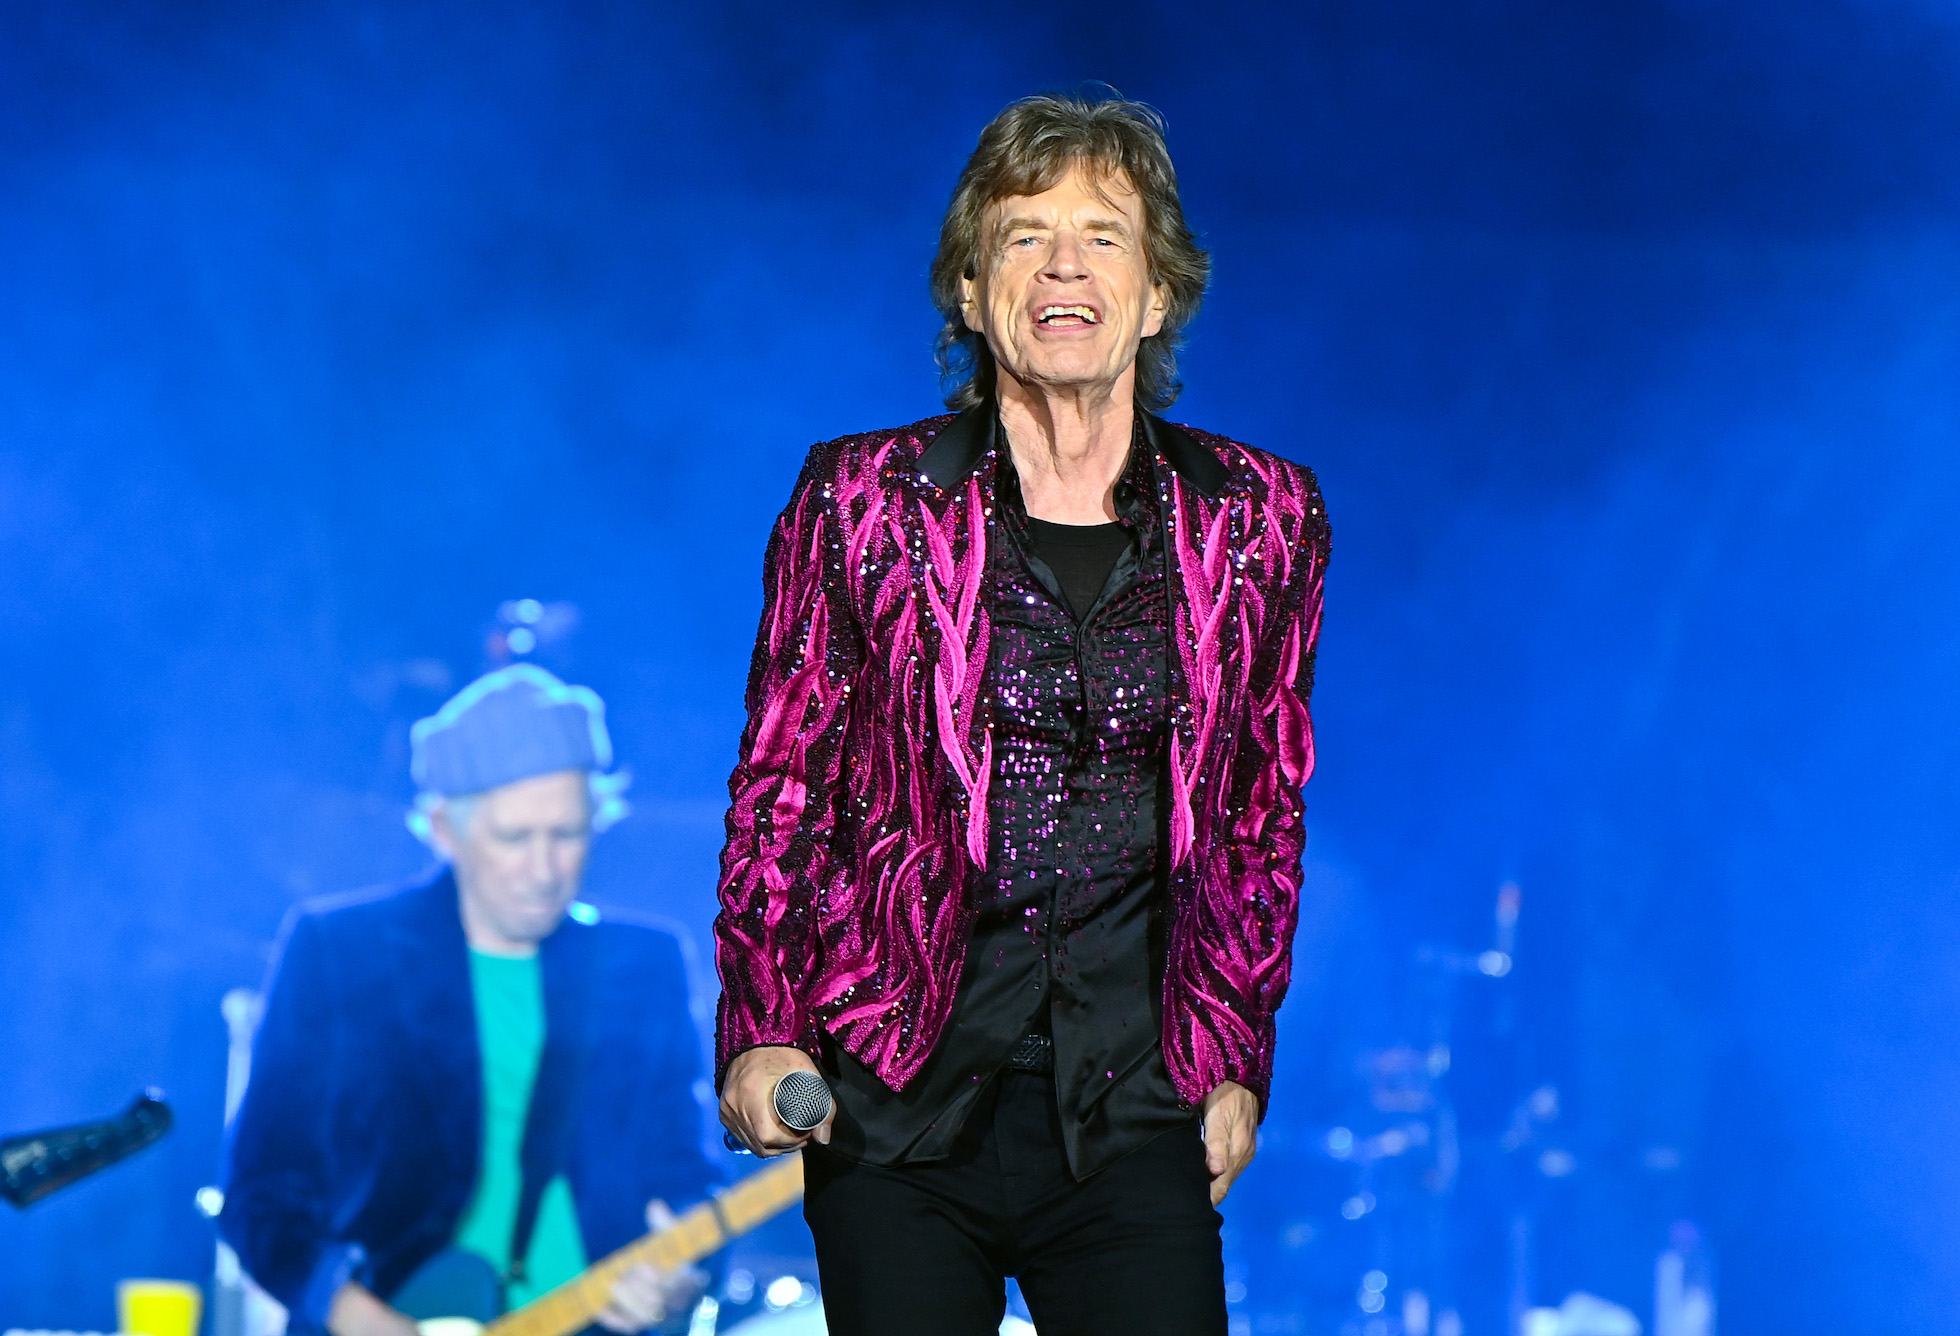 You are currently viewing The Rolling Stones Album Mick Jagger Says Only Has ‘Two Good Songs’